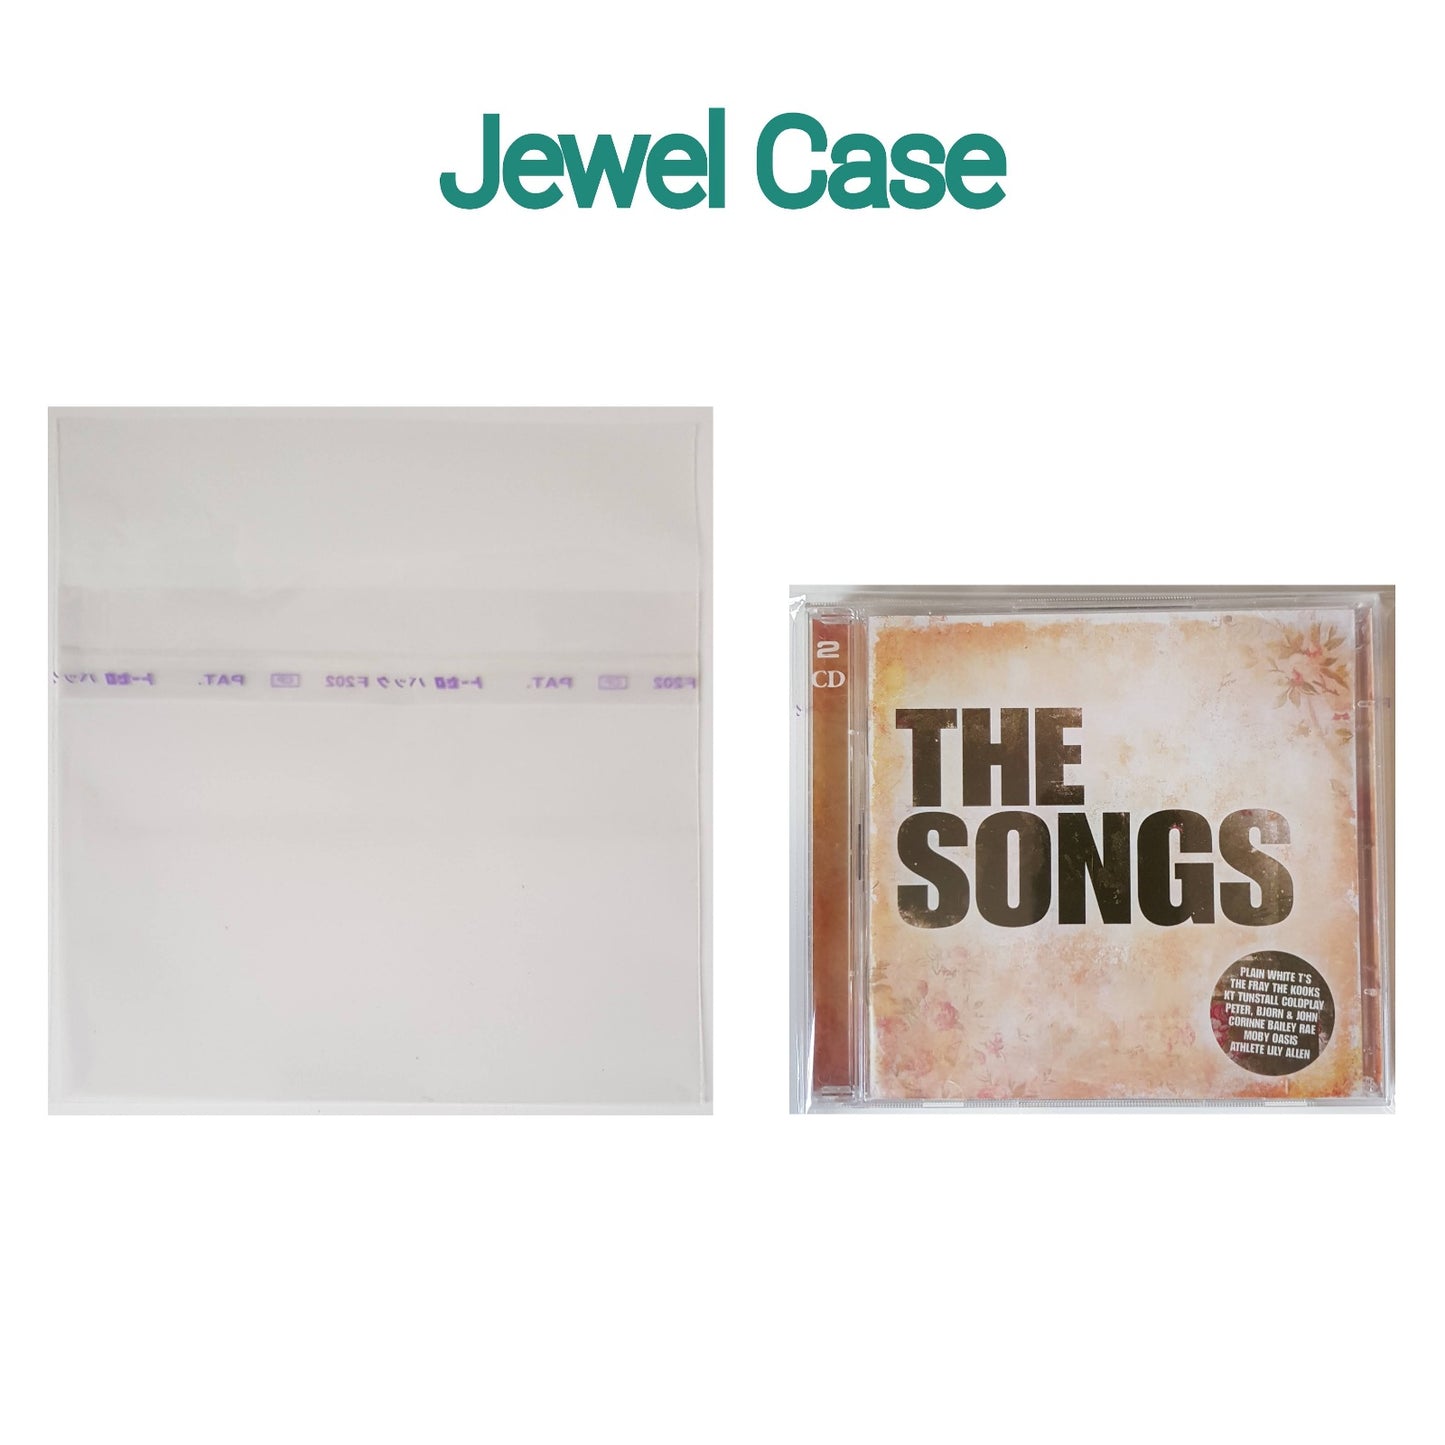 100 CD Jewel Case Resealable Japanese Sleeves